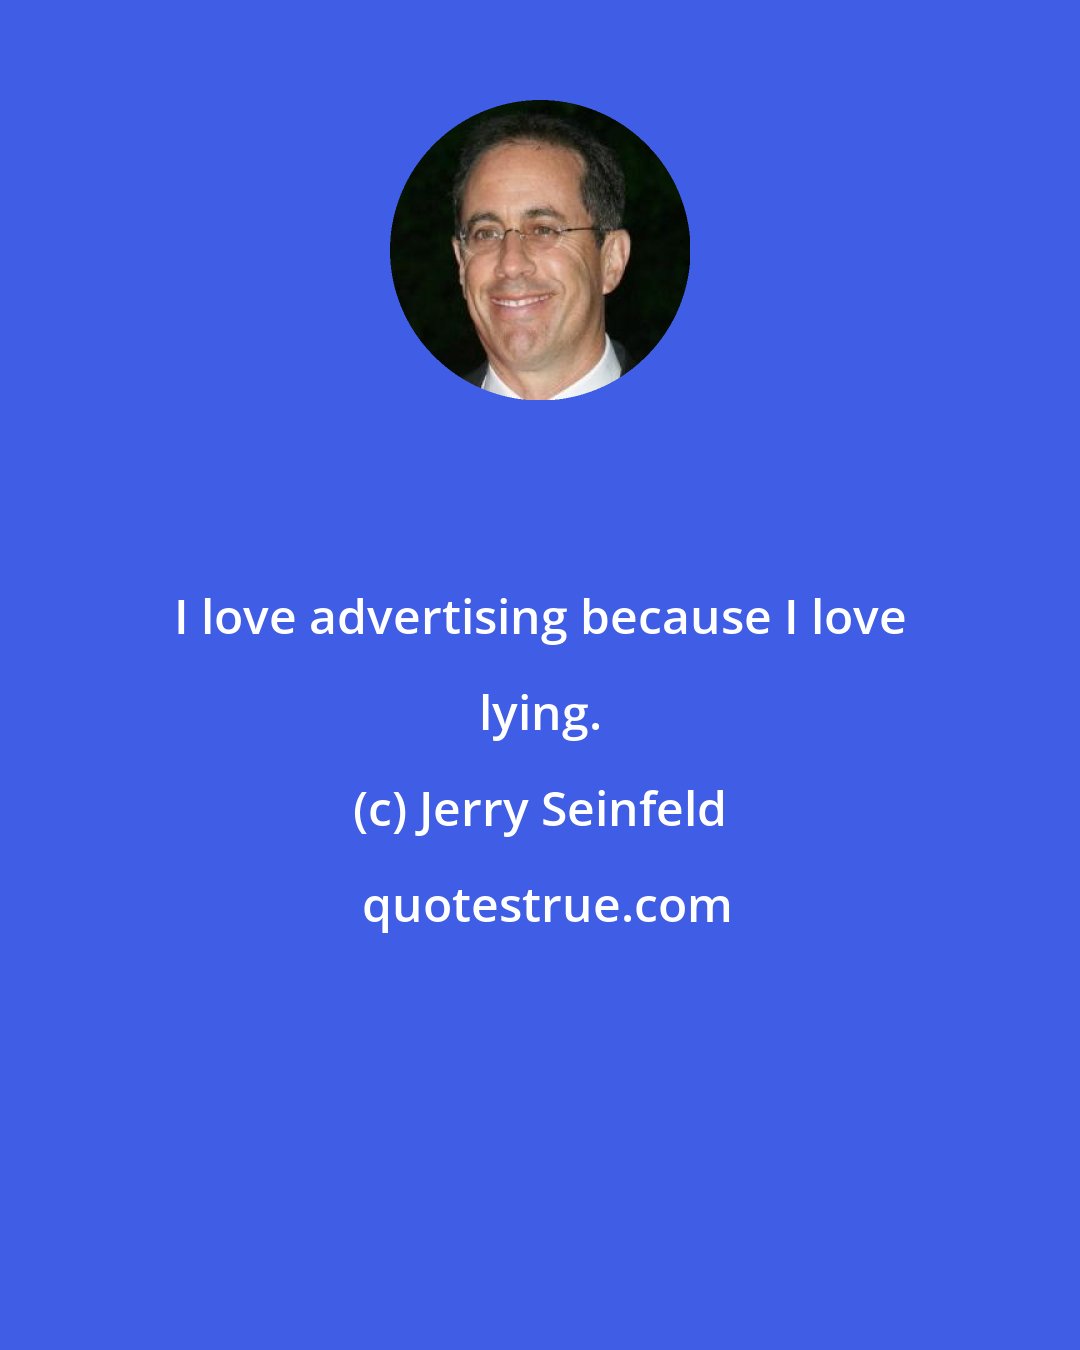 Jerry Seinfeld: I love advertising because I love lying.